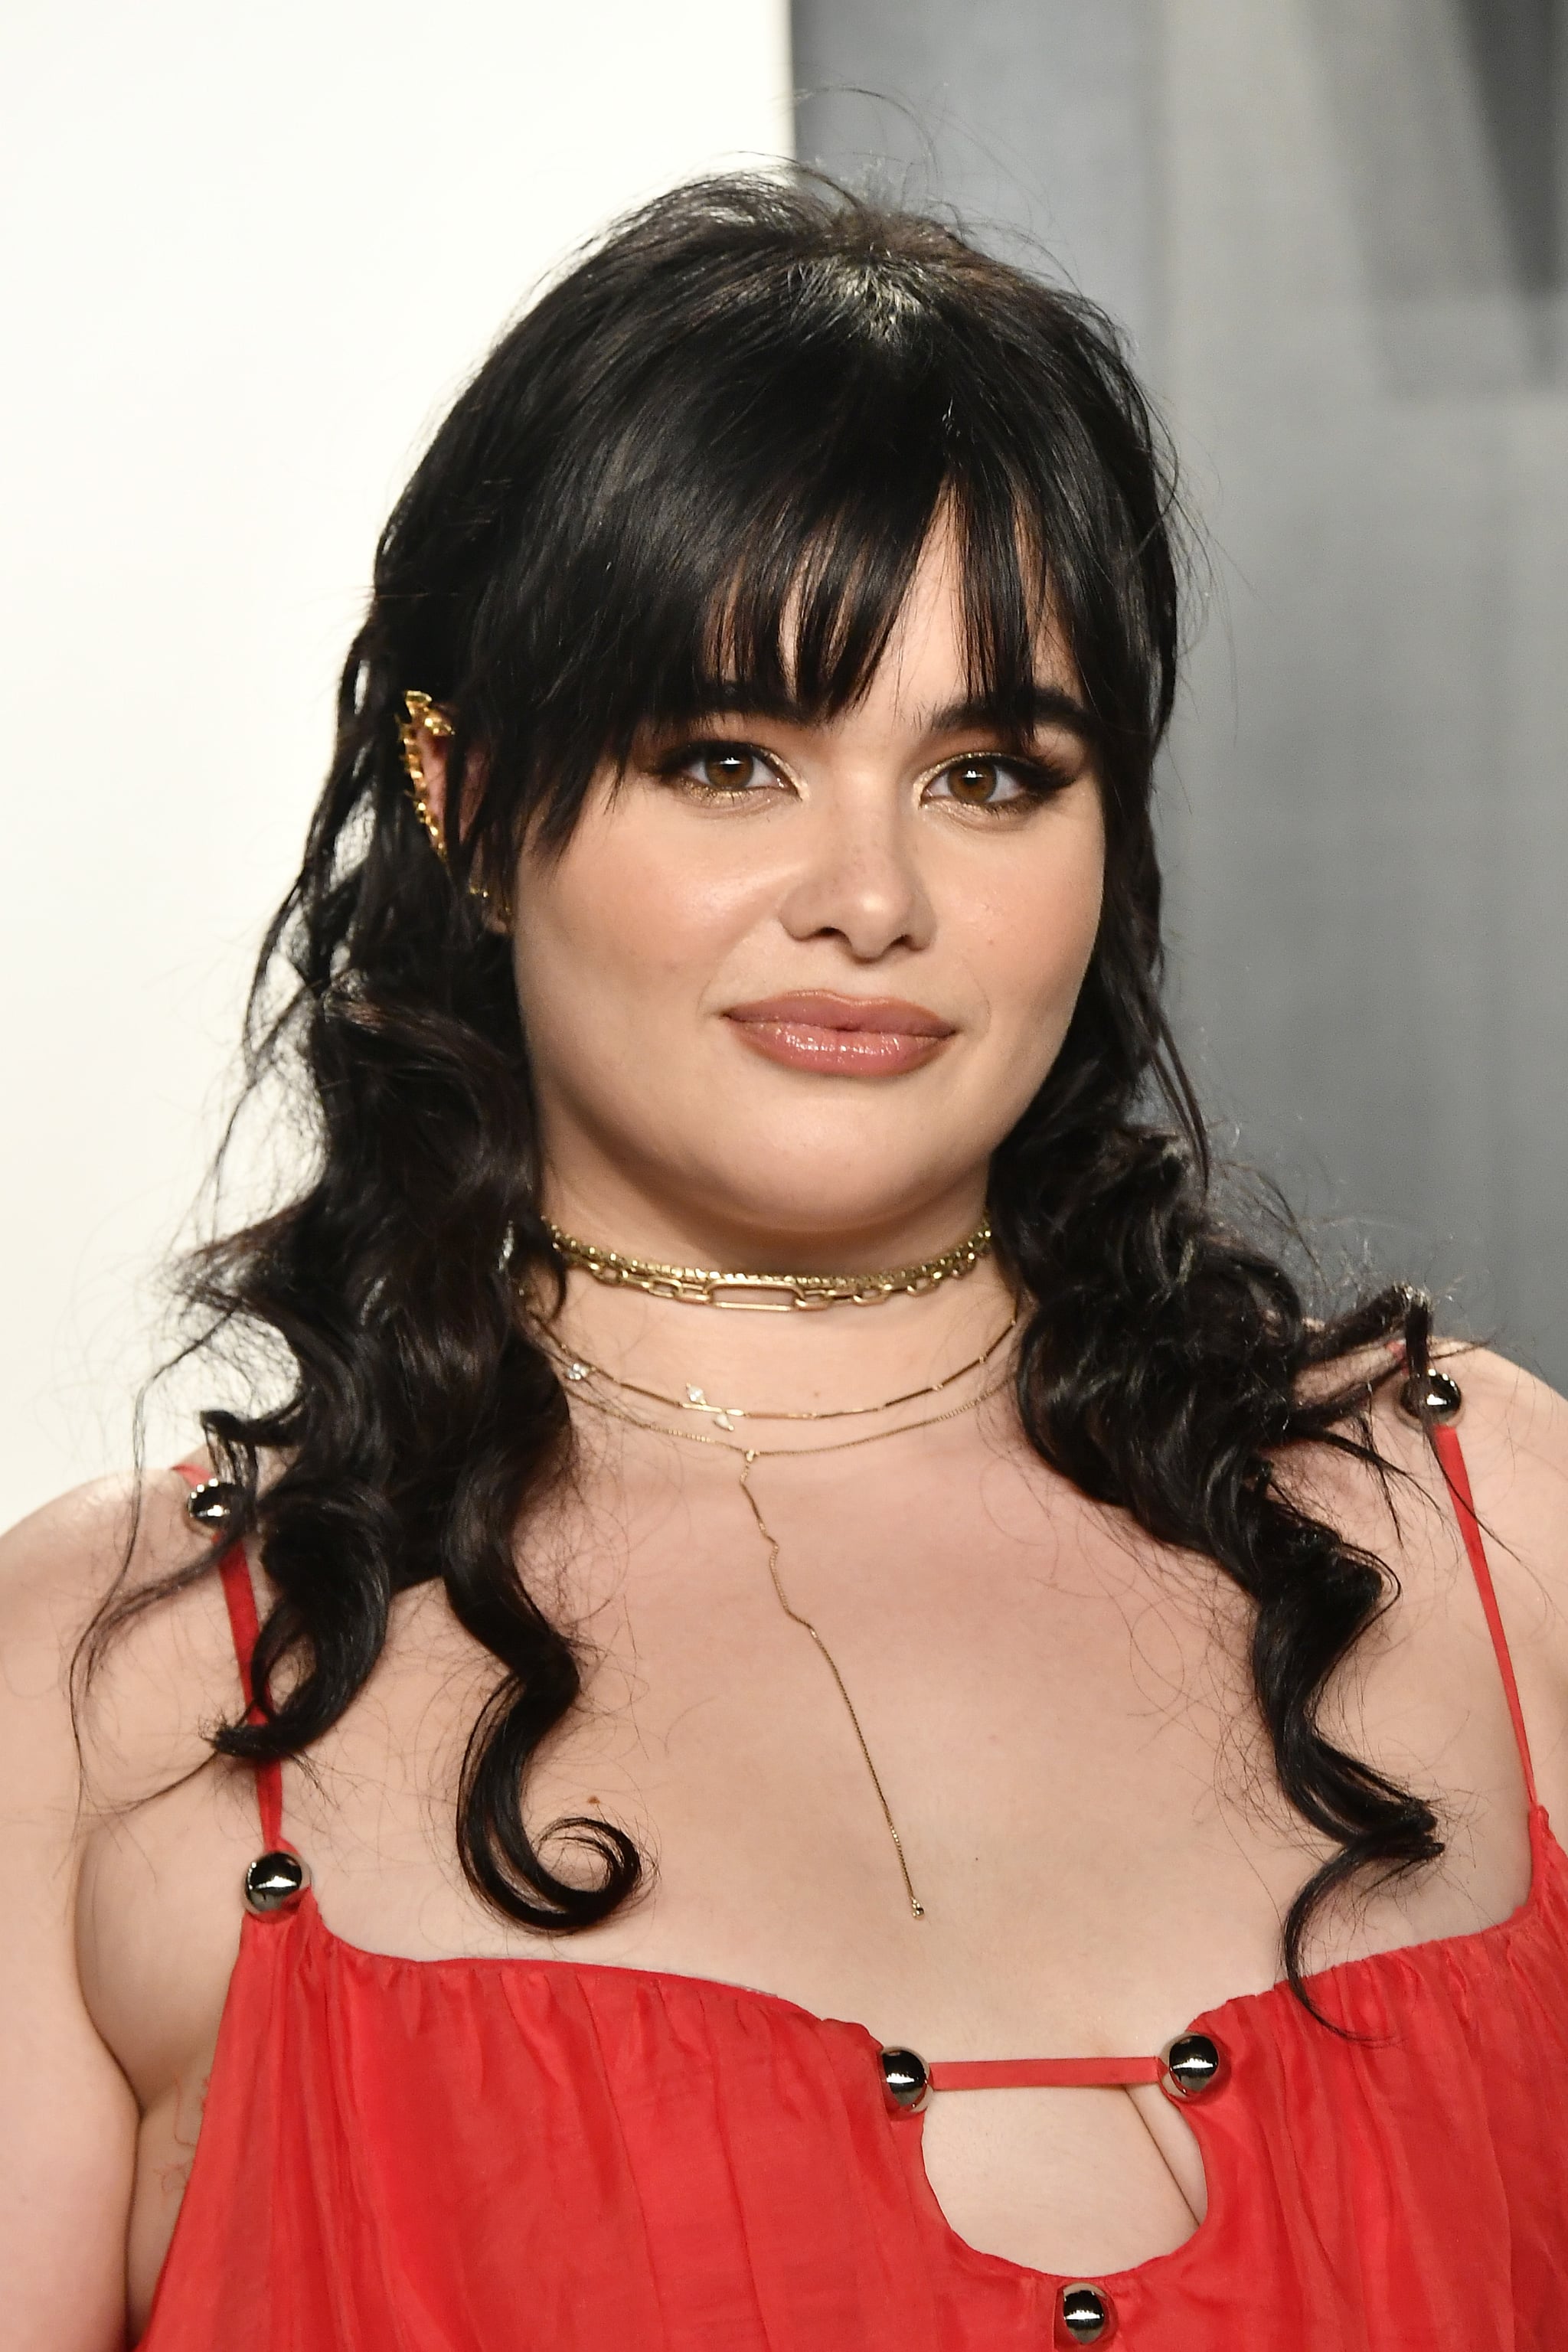 BEVERLY HILLS, CALIFORNIA - FEBRUARY 09: Barbie Ferreira attends the 2020 Vanity Fair Oscar Party hosted by Radhika Jones at Wallis Annenberg Center for the Performing Arts on February 09, 2020 in Beverly Hills, California. (Photo by Frazer Harrison/Getty Images)